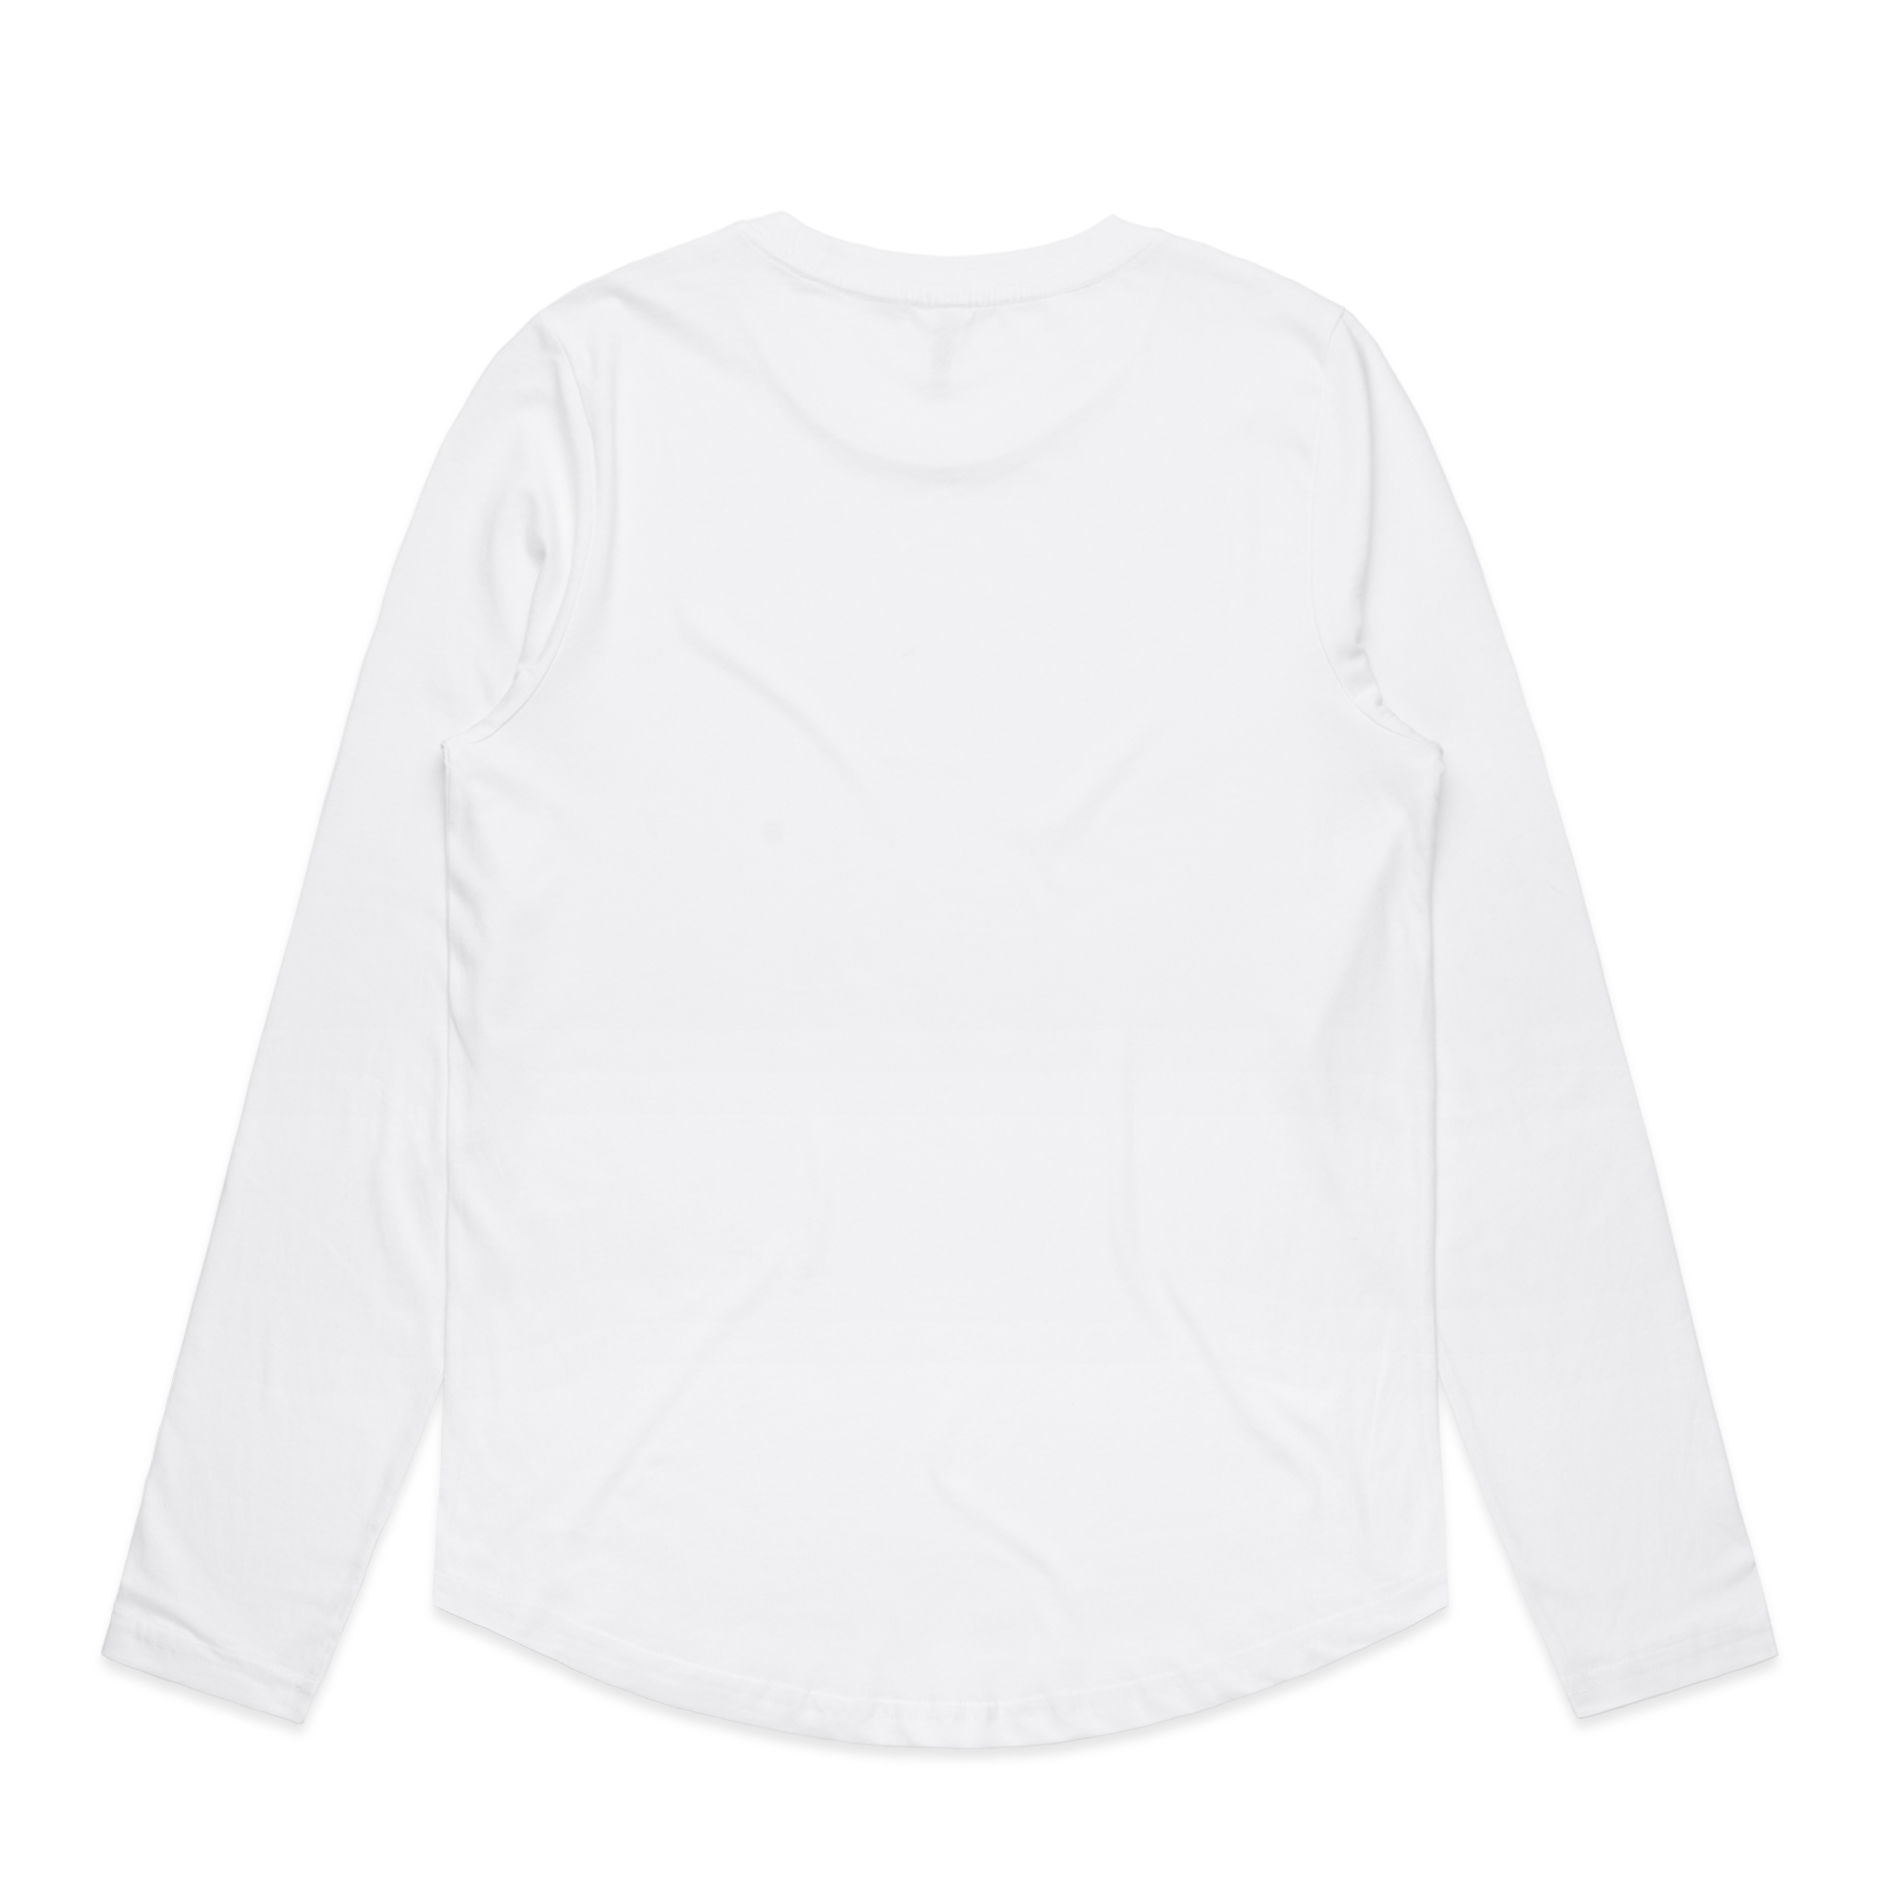 Women's AS Colour Curved Long Sleeve Tee - White - Uniform Edit